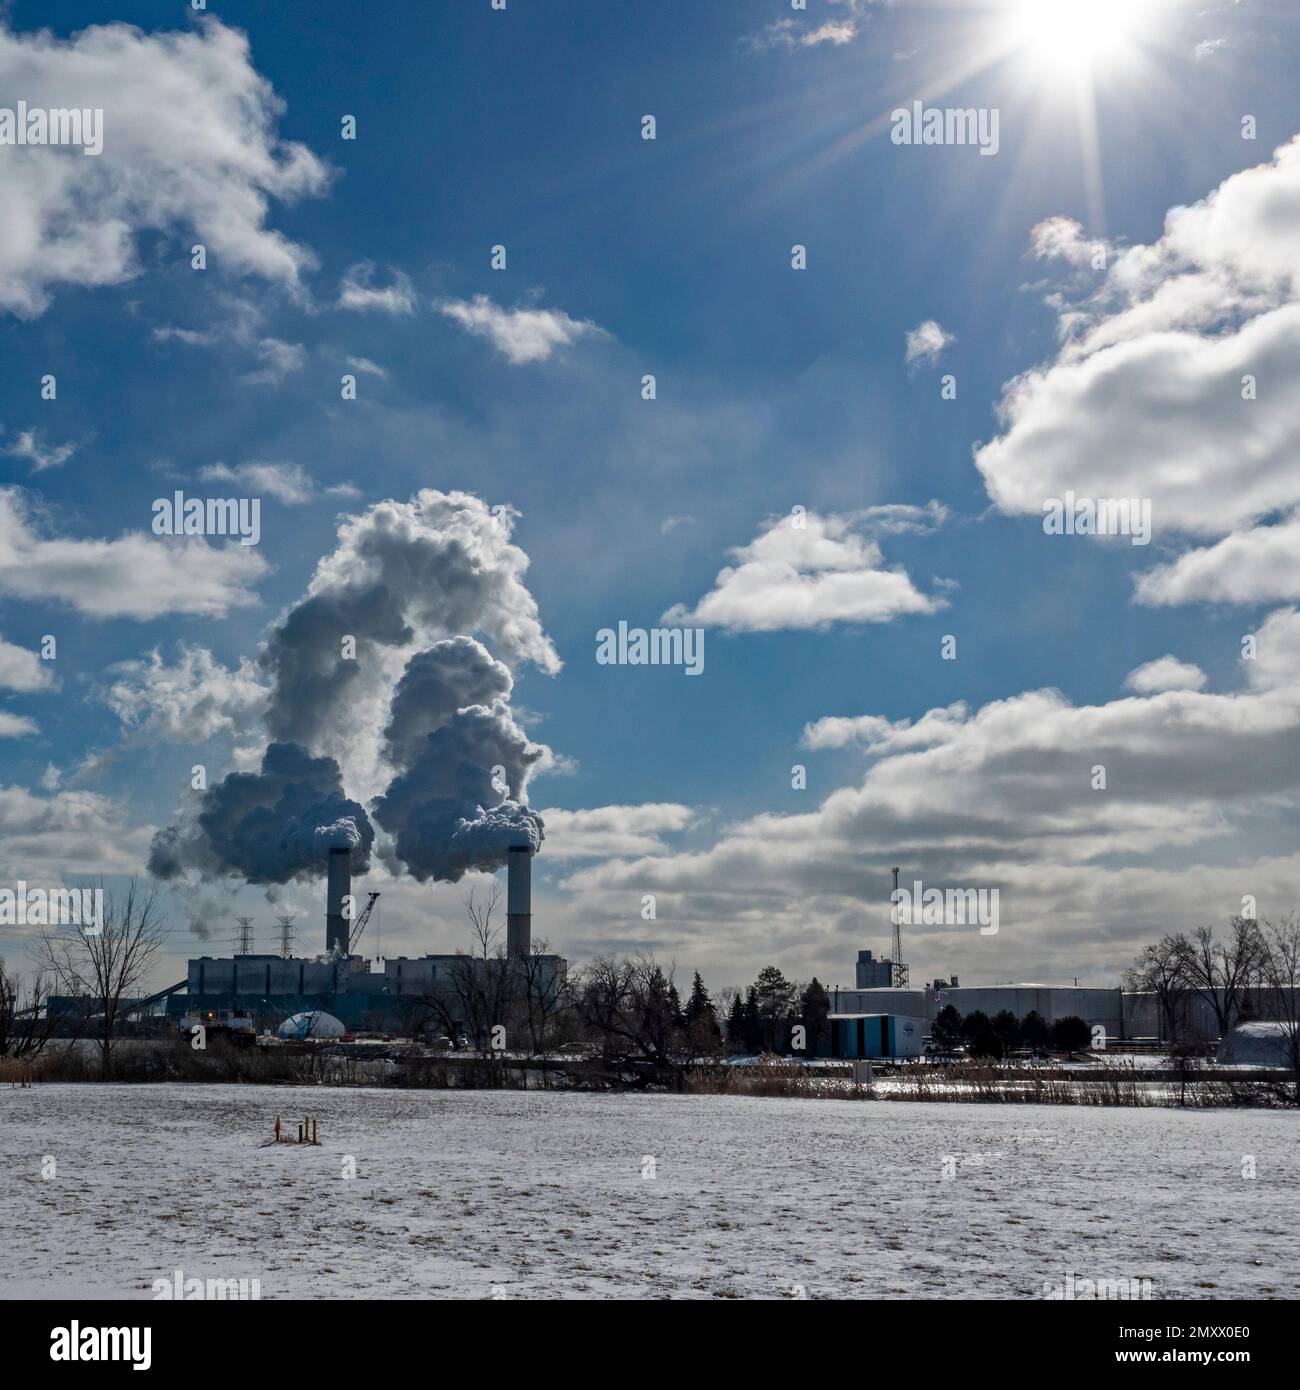 Monroe, Michigan - DTE's Energy's Monroe Power Plant on the shore of Lake Erie. The coal-fired plant is the second biggest emitter of greenhouse gases Stock Photo